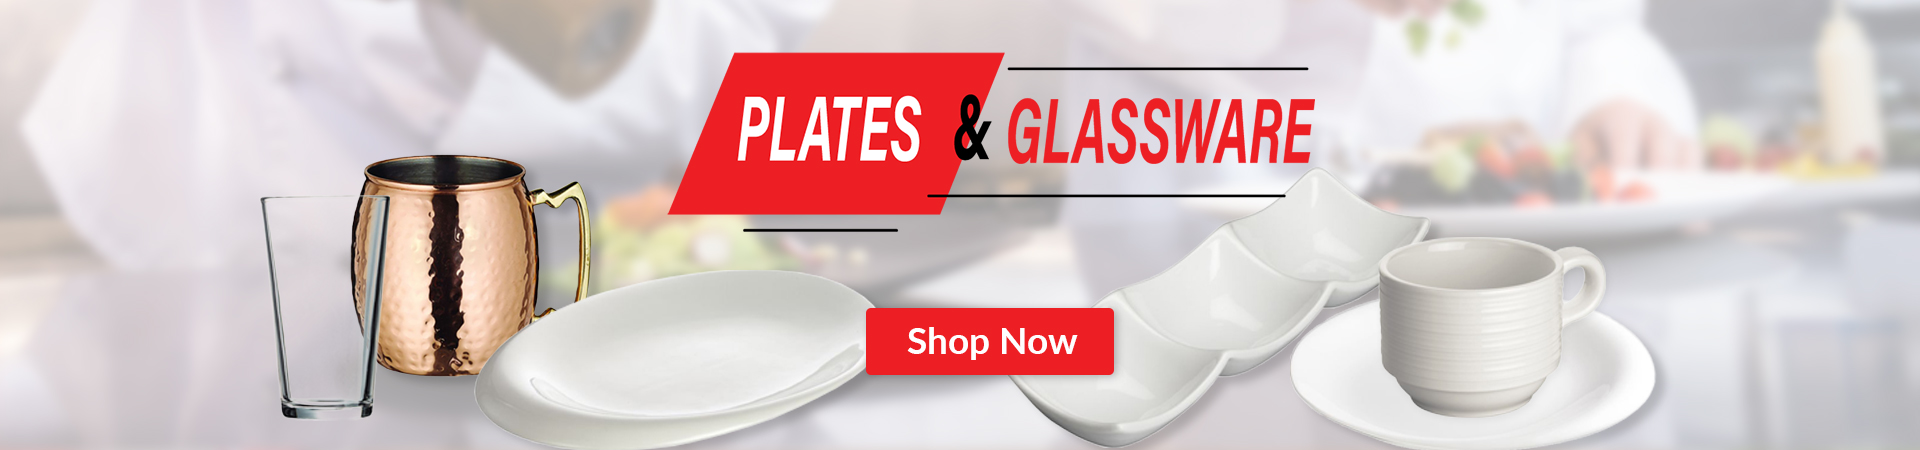 Plates and Glassware